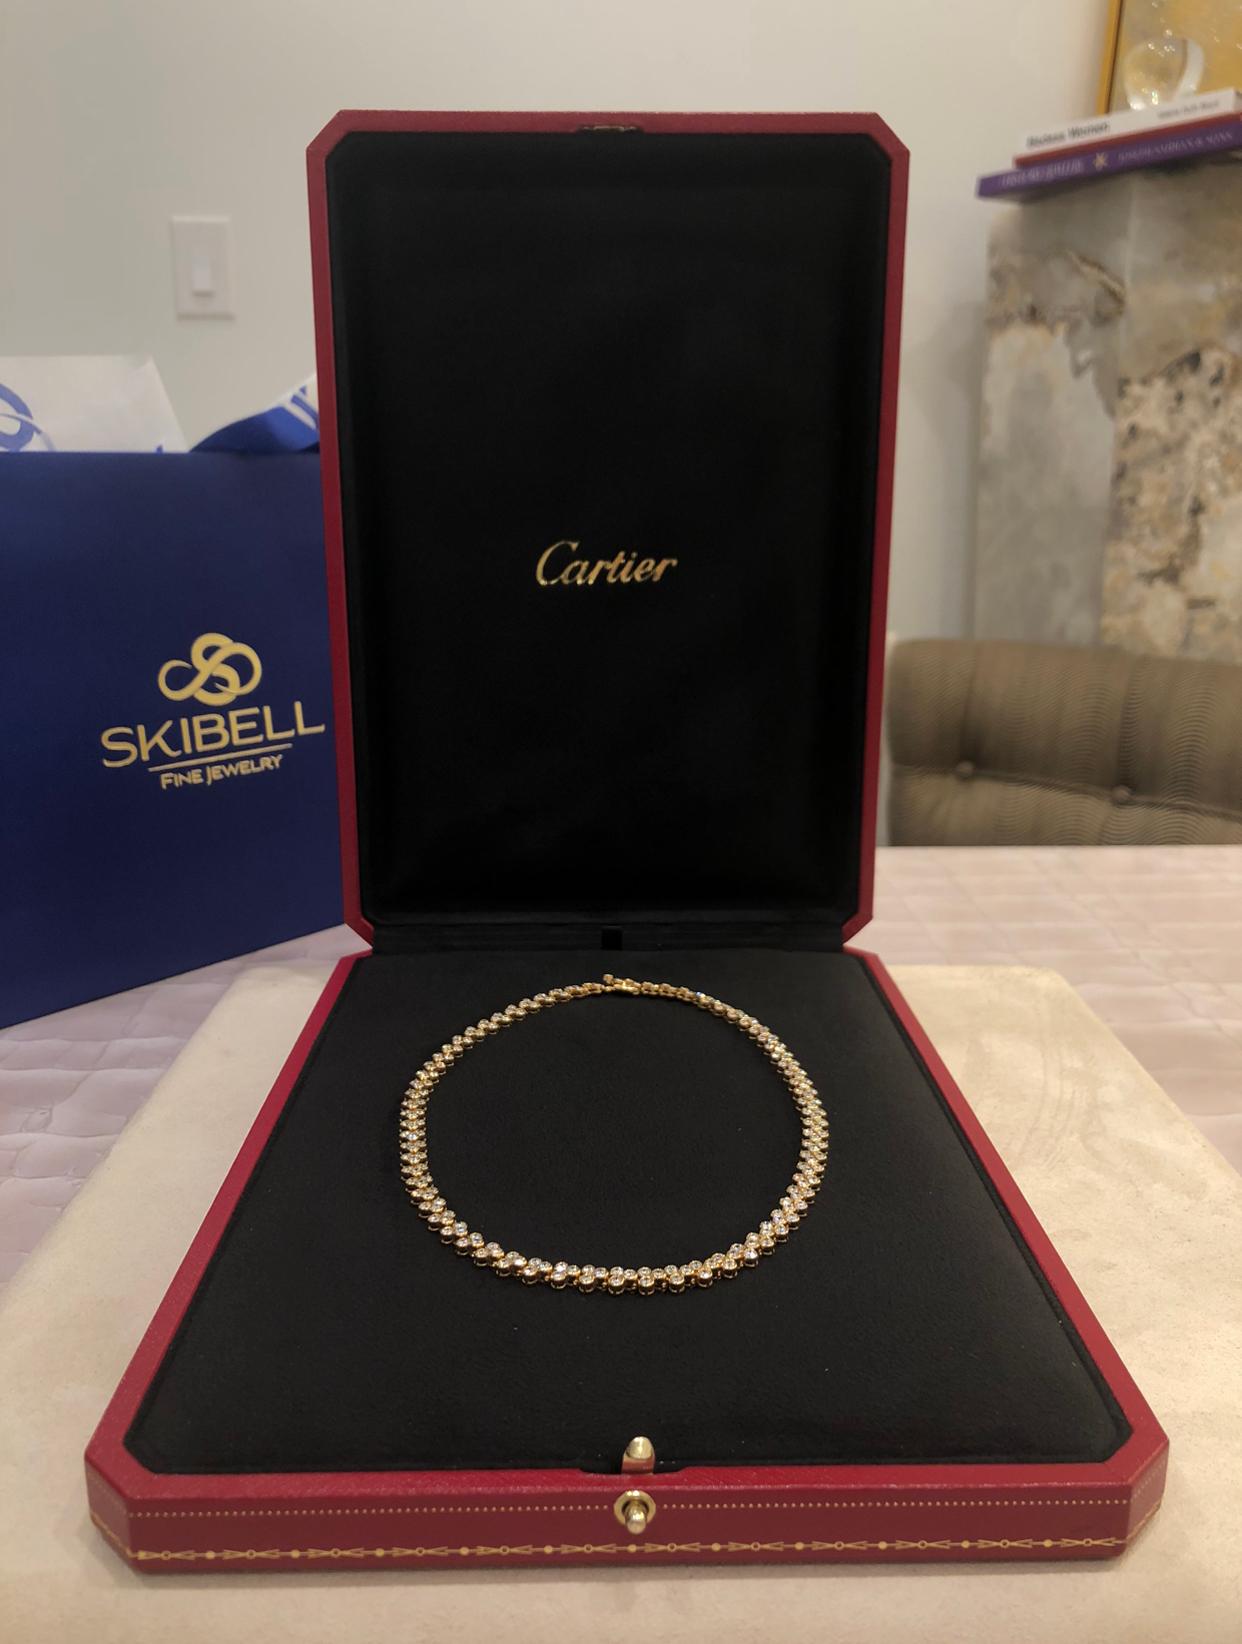 Cartier Bezel Set Diamond Necklace in 18K Yellow Gold. The necklace features 12.60ctw of brilliant round cut diamonds, F-G color, VVS clarity. The necklace is 15.5 inches long and 1/4 inch wide. Signed and numbered with french hallmarks. Comes with